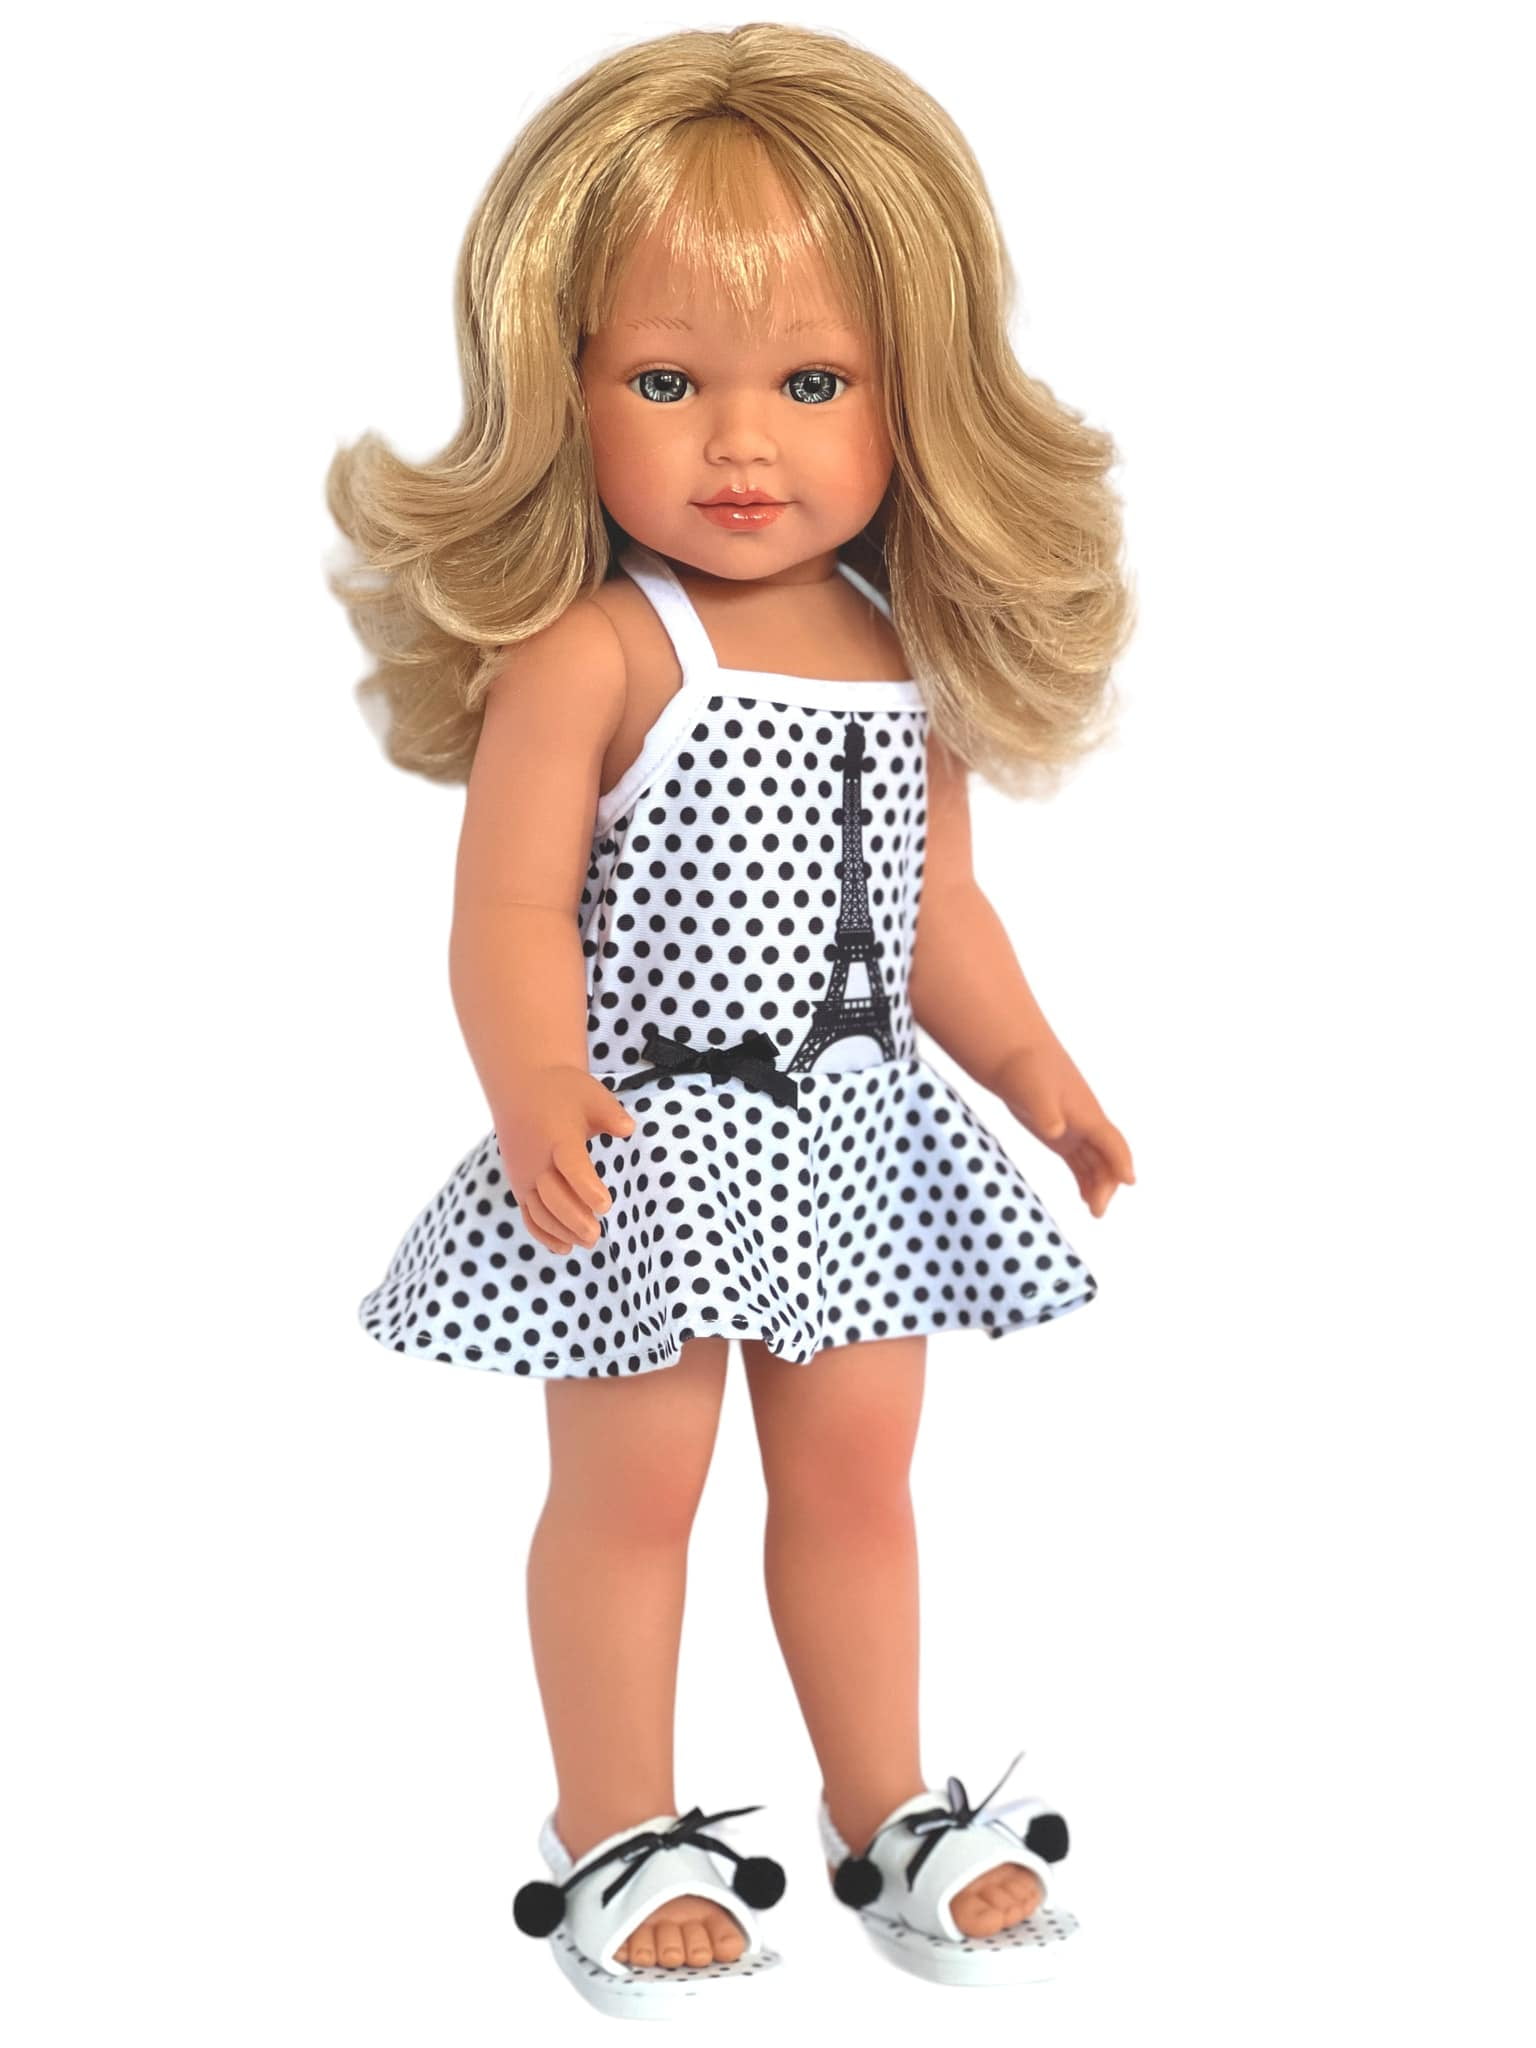 Parisian Swimsuit with Sandals For 18 Inch Kennedy and Friends Dolls- Fits  all 18 inch dolls 